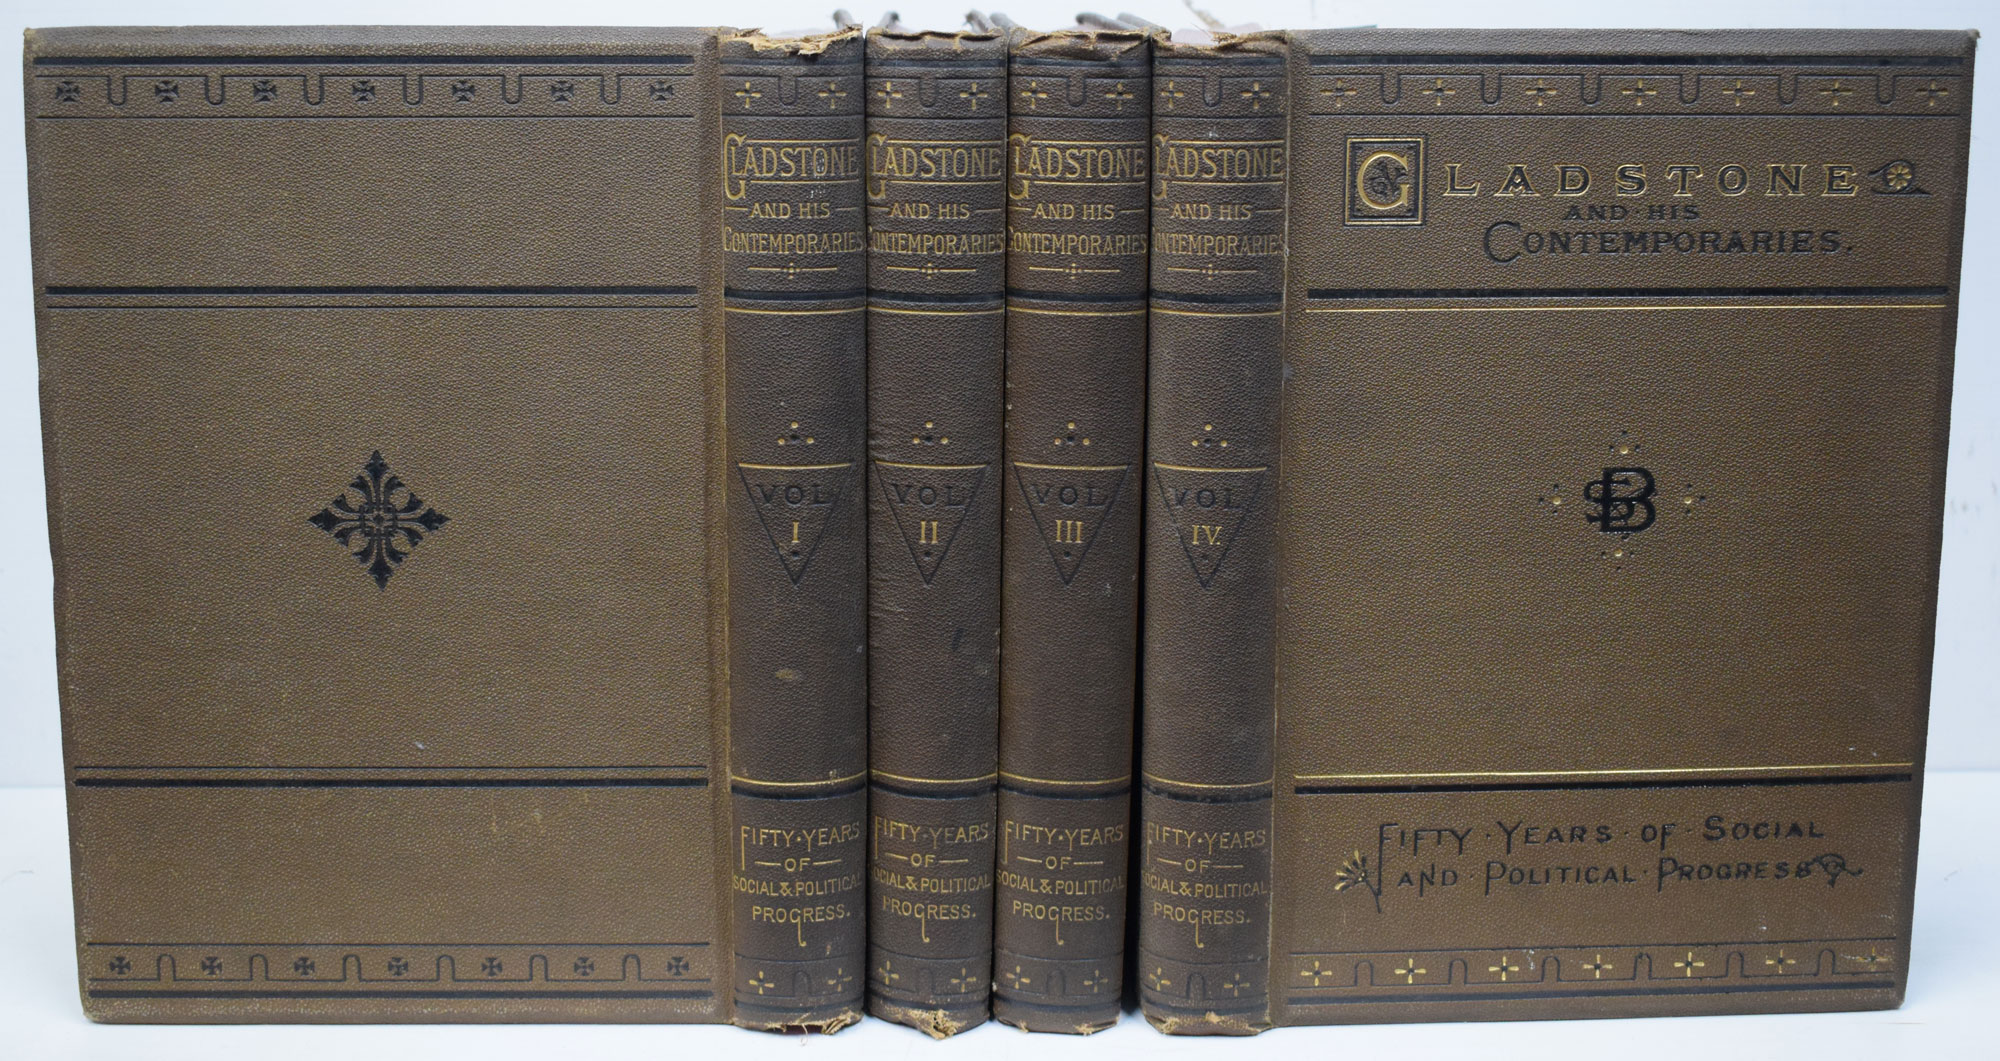 William Ewart Gladstone and his Contemporaries. Fifty Years of Social and Political Progress. Four volume set.